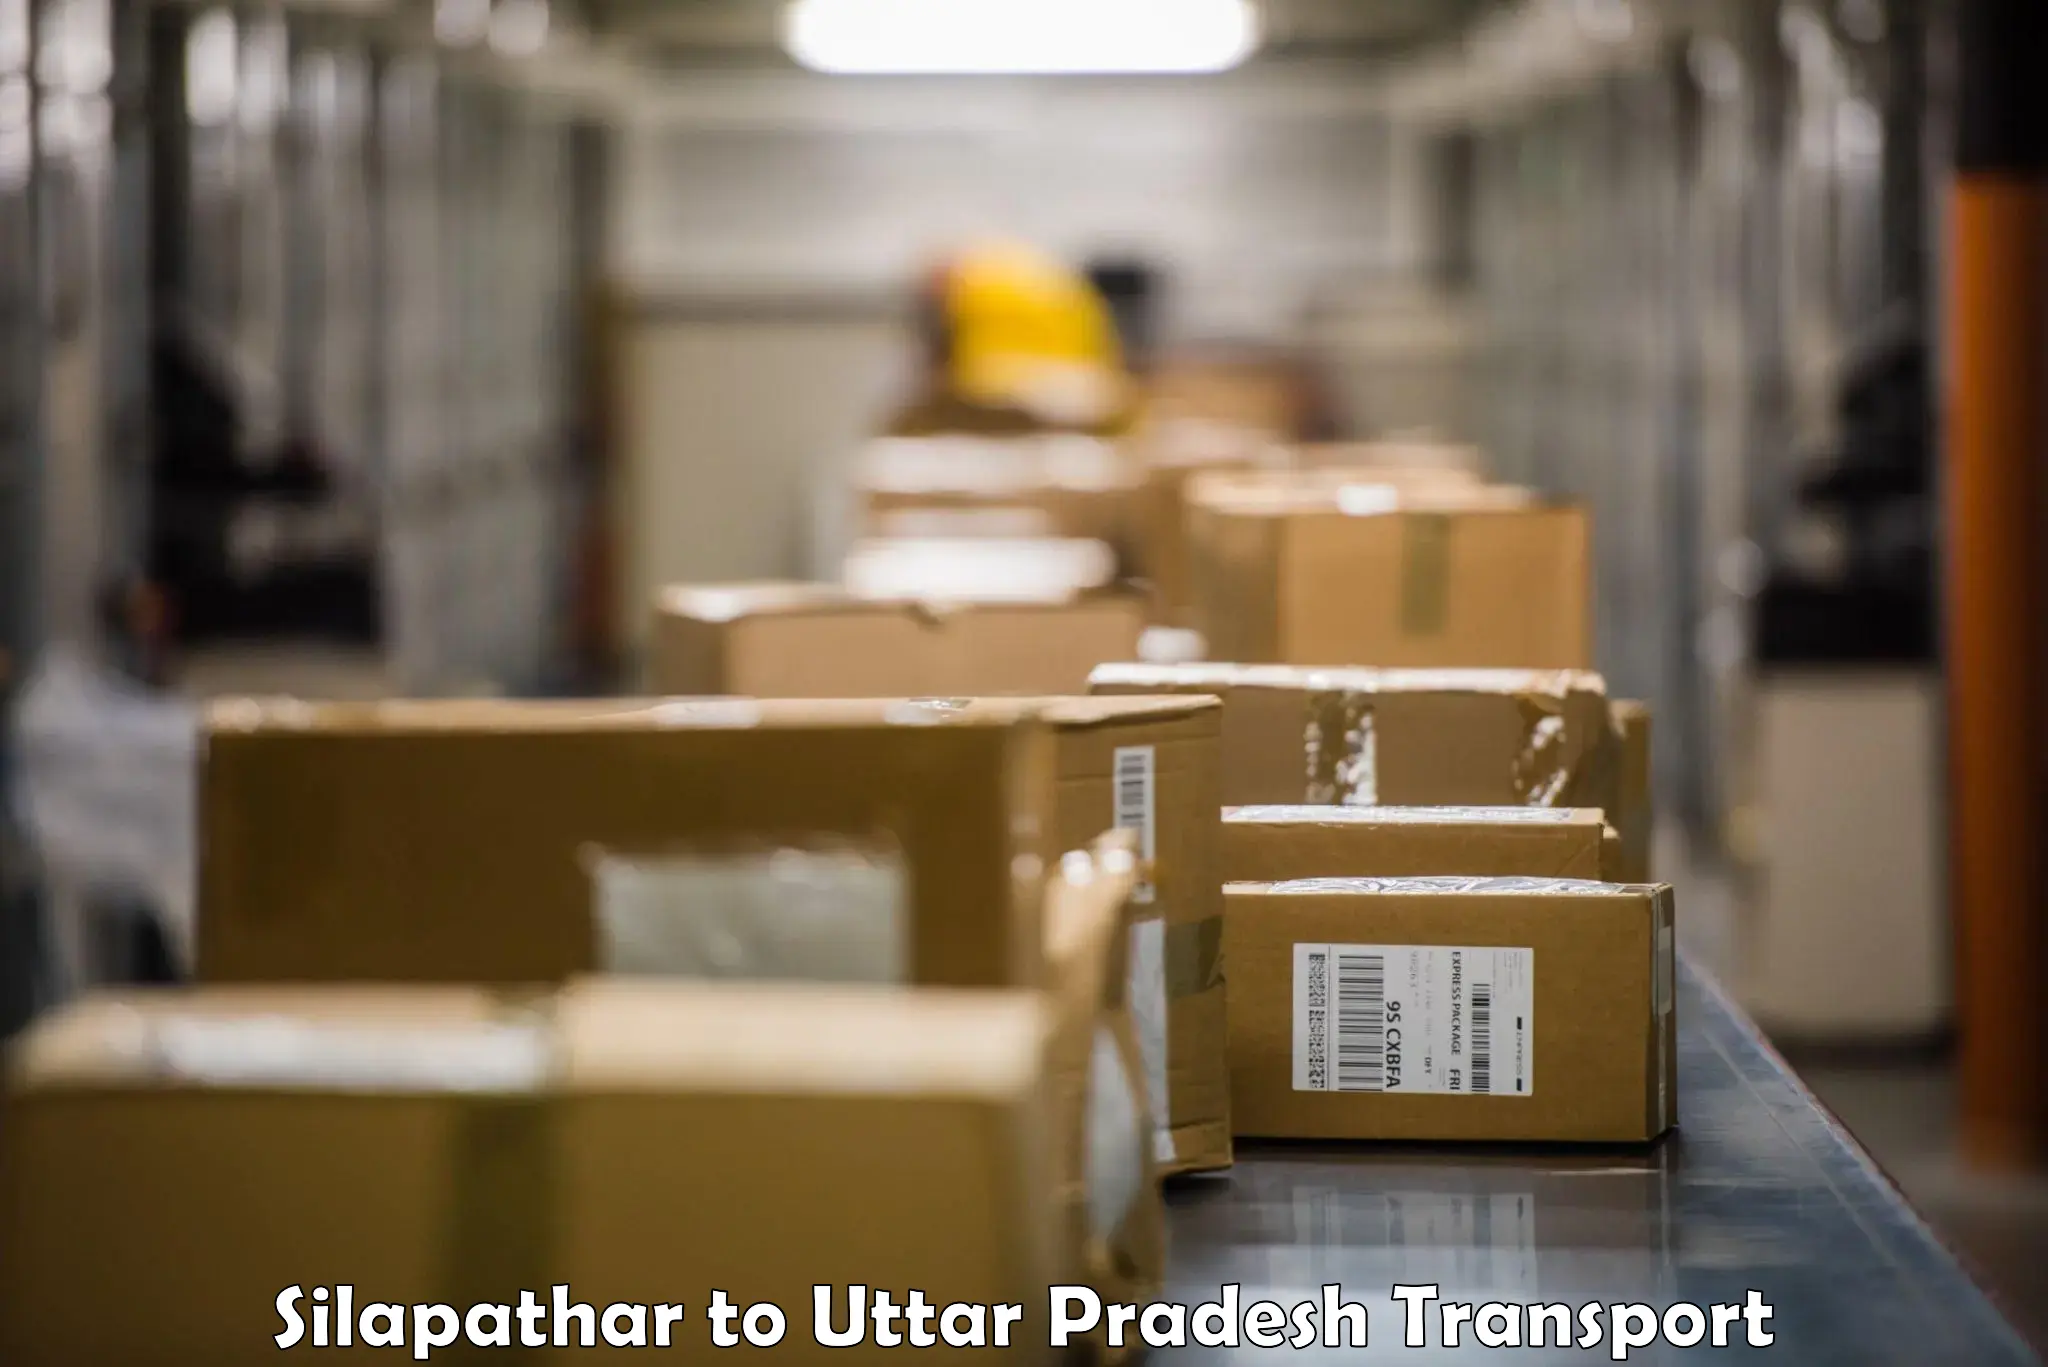 Commercial transport service Silapathar to Chitrakoot